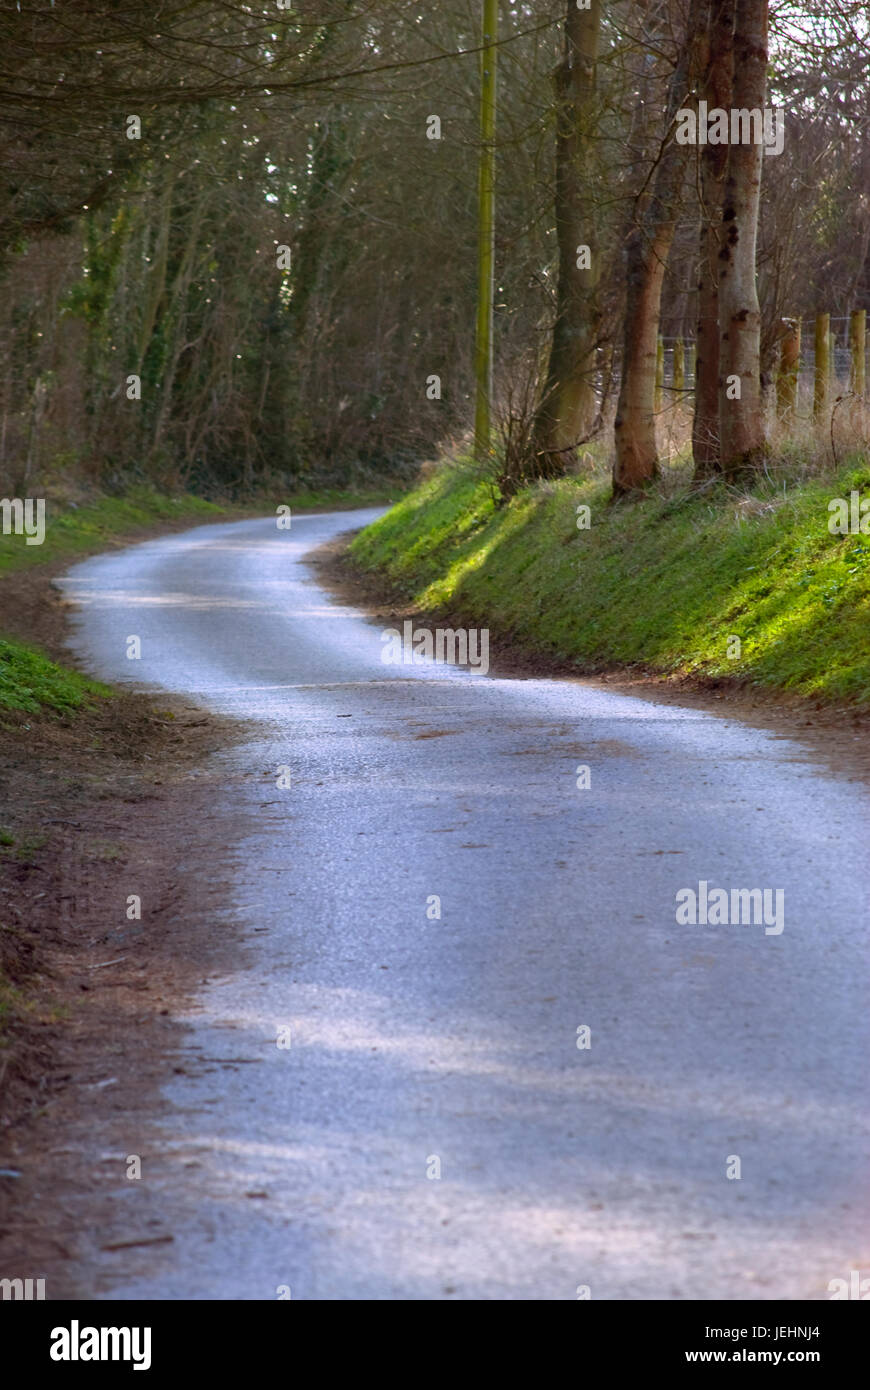 Dappled sunlight shines through the tree canopy on a country road, as it curves away into the distance. Stock Photo